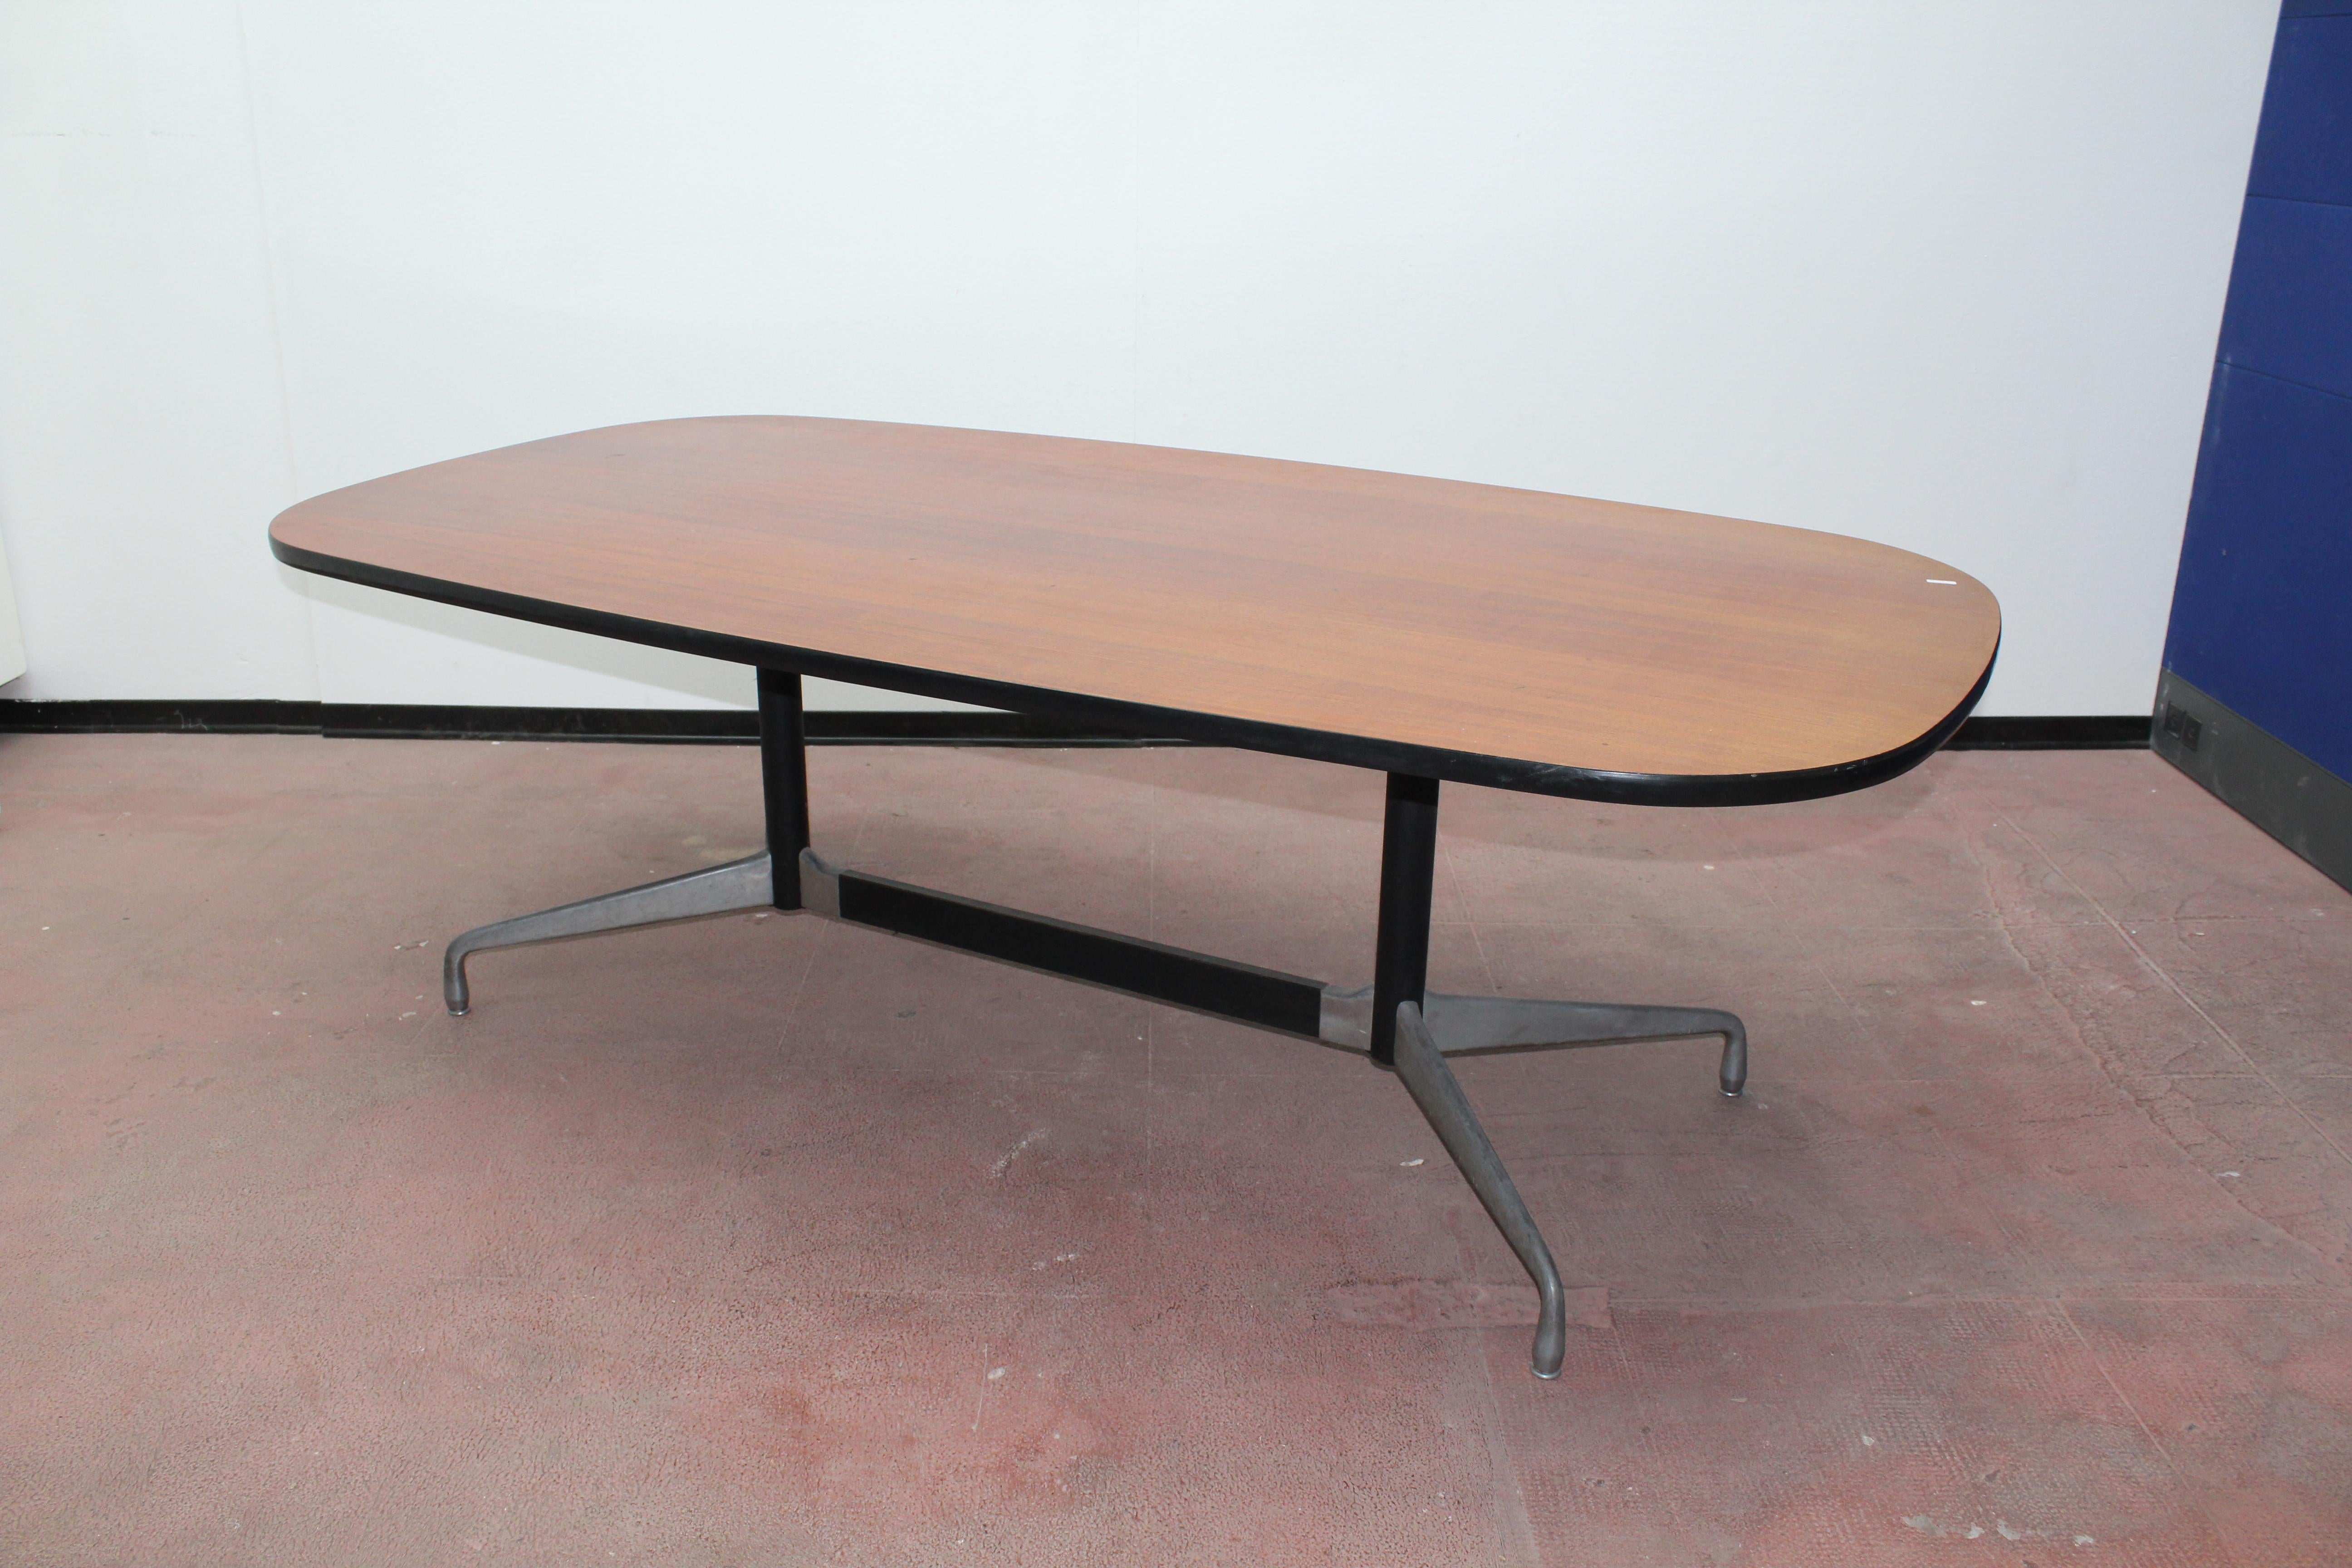 20th Century Modern Ashwood Conference Table Charles Eames 60s 1